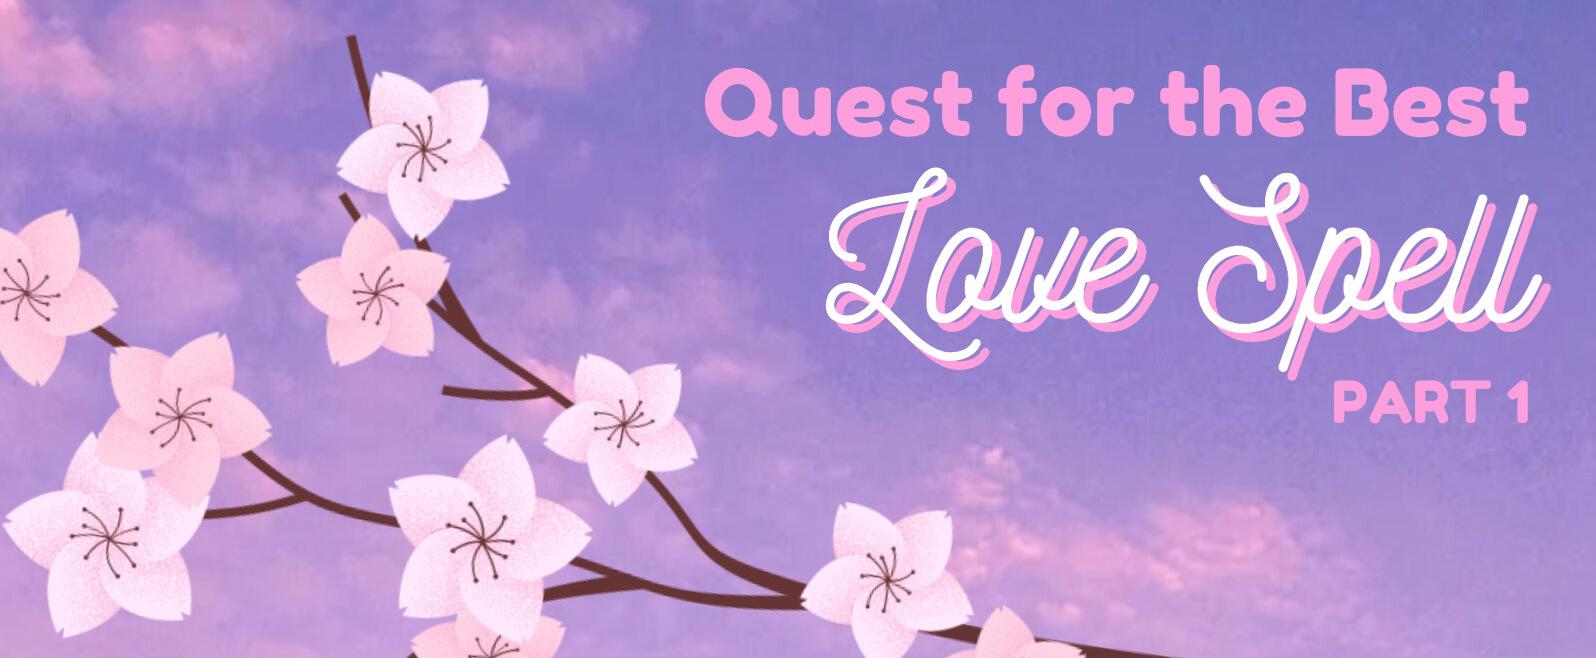 Quest for the Best Love Spell, Part 1: The Missing Note